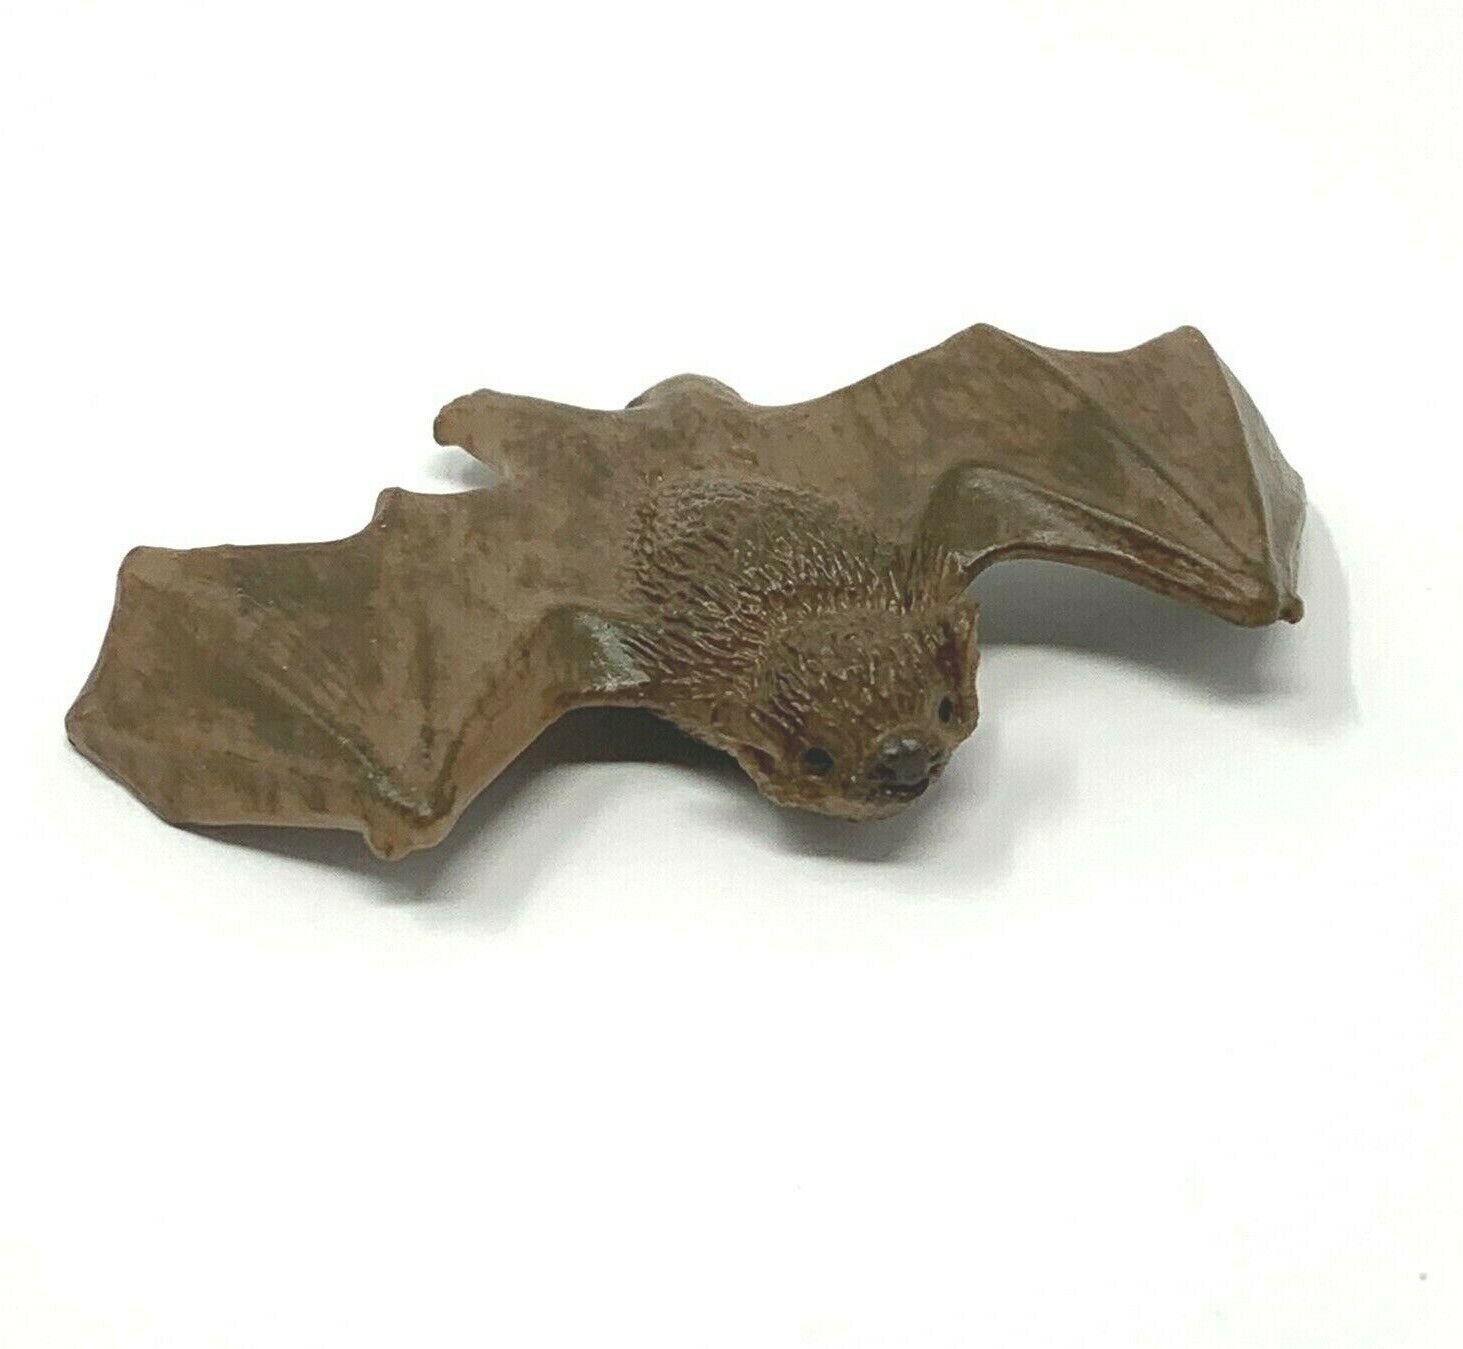 YOWIE Southern Bent Winged Bat Animals with Superpowers Collection 2